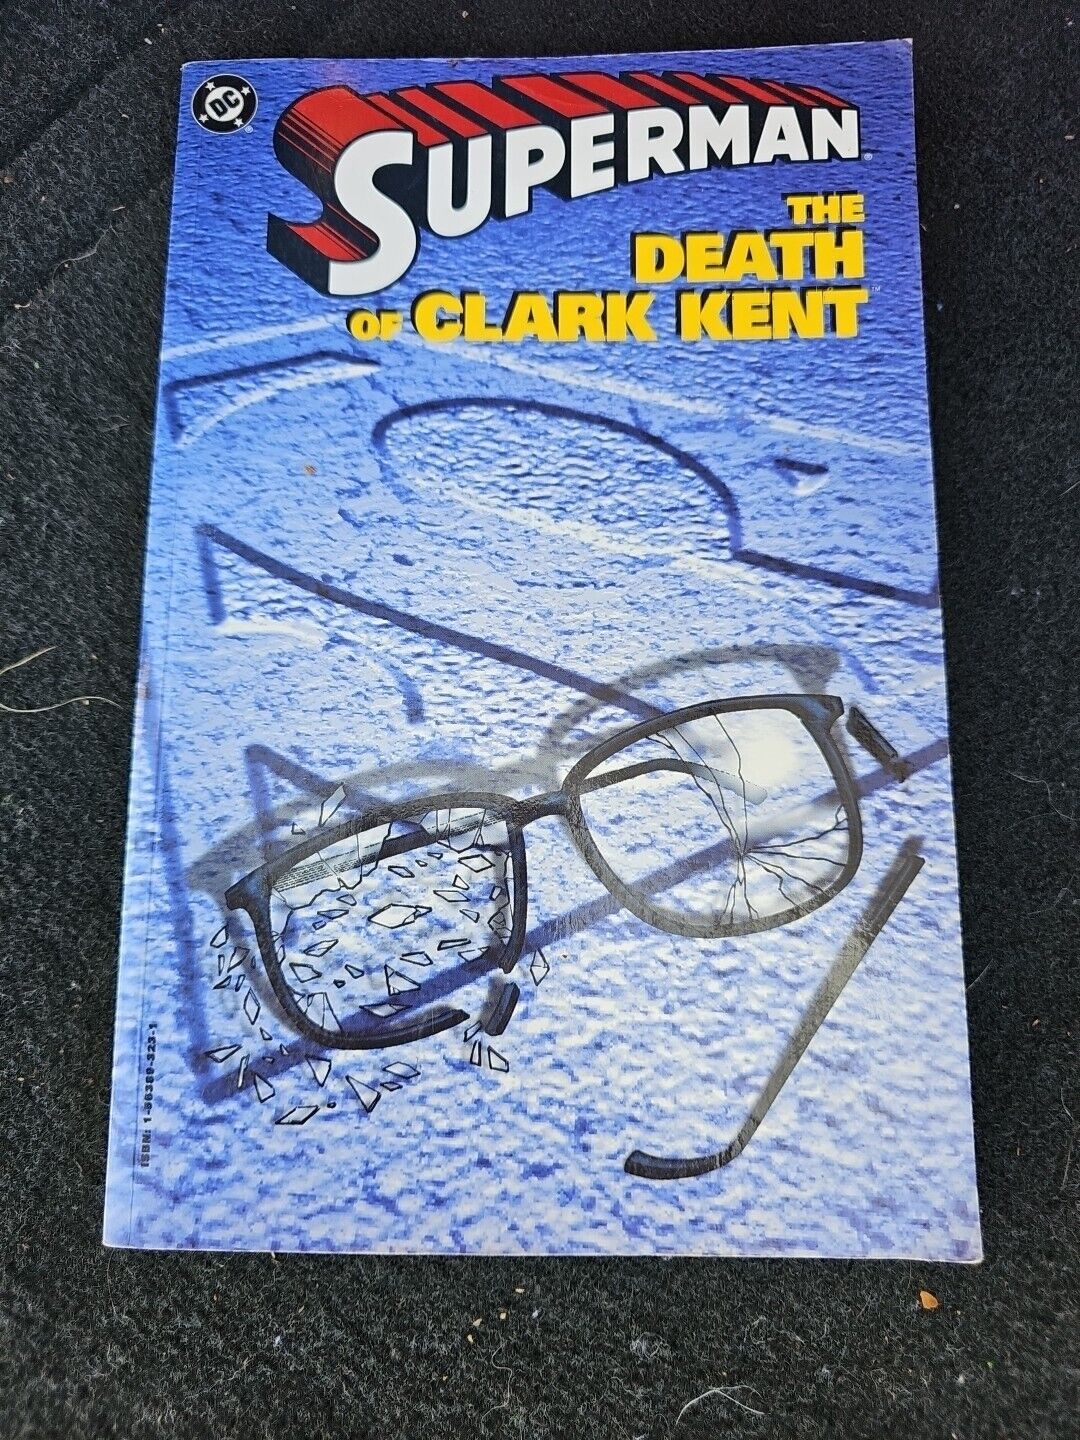 SUPERMAN: THE DEATH OF CLARK KENT Great Condition Vintage